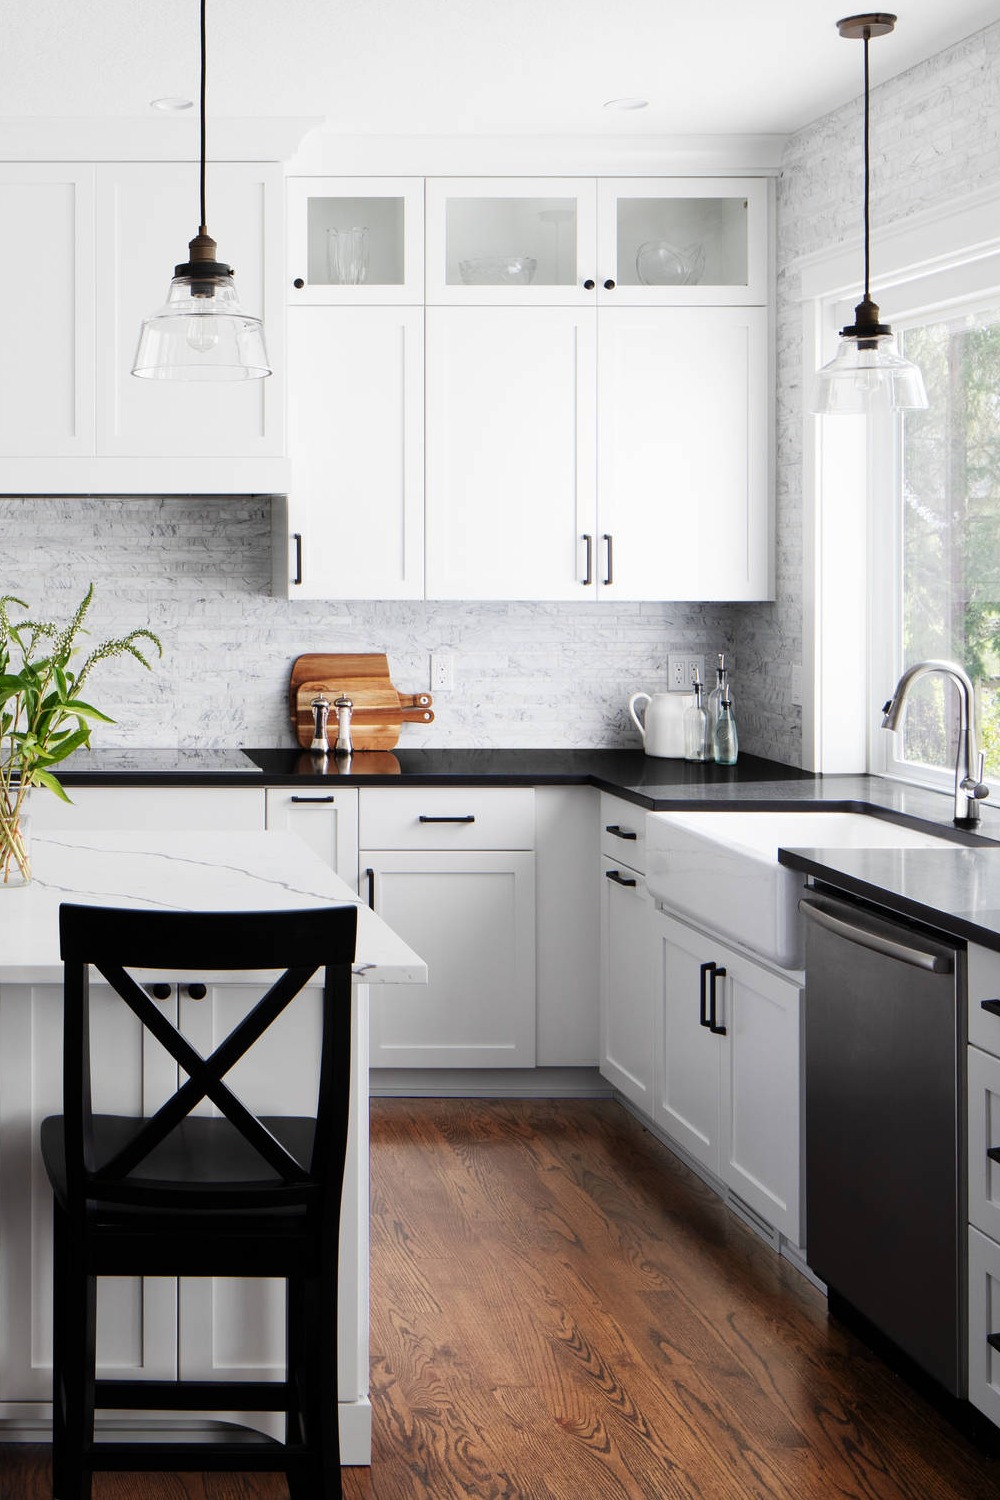 Black Countertops White Cabinets White Shaker Cabinets Dark Wood Floor Pendant Lights Black Countertop Stainless Steel Eat In Kitchen Black And White Kitchen